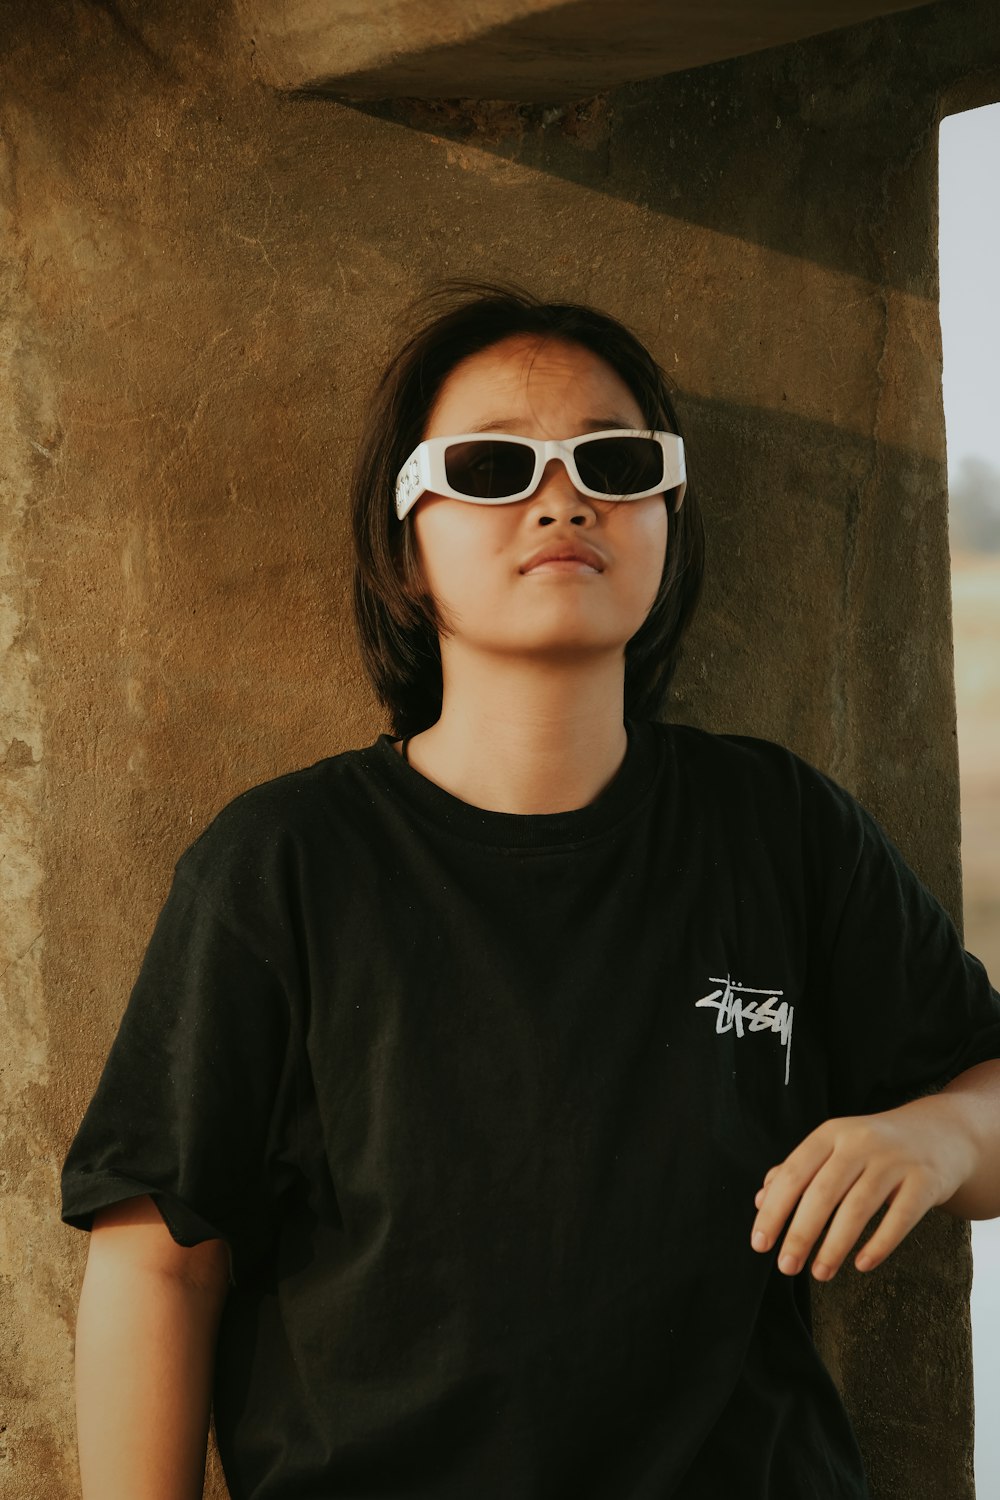 a woman wearing a black shirt and white sunglasses